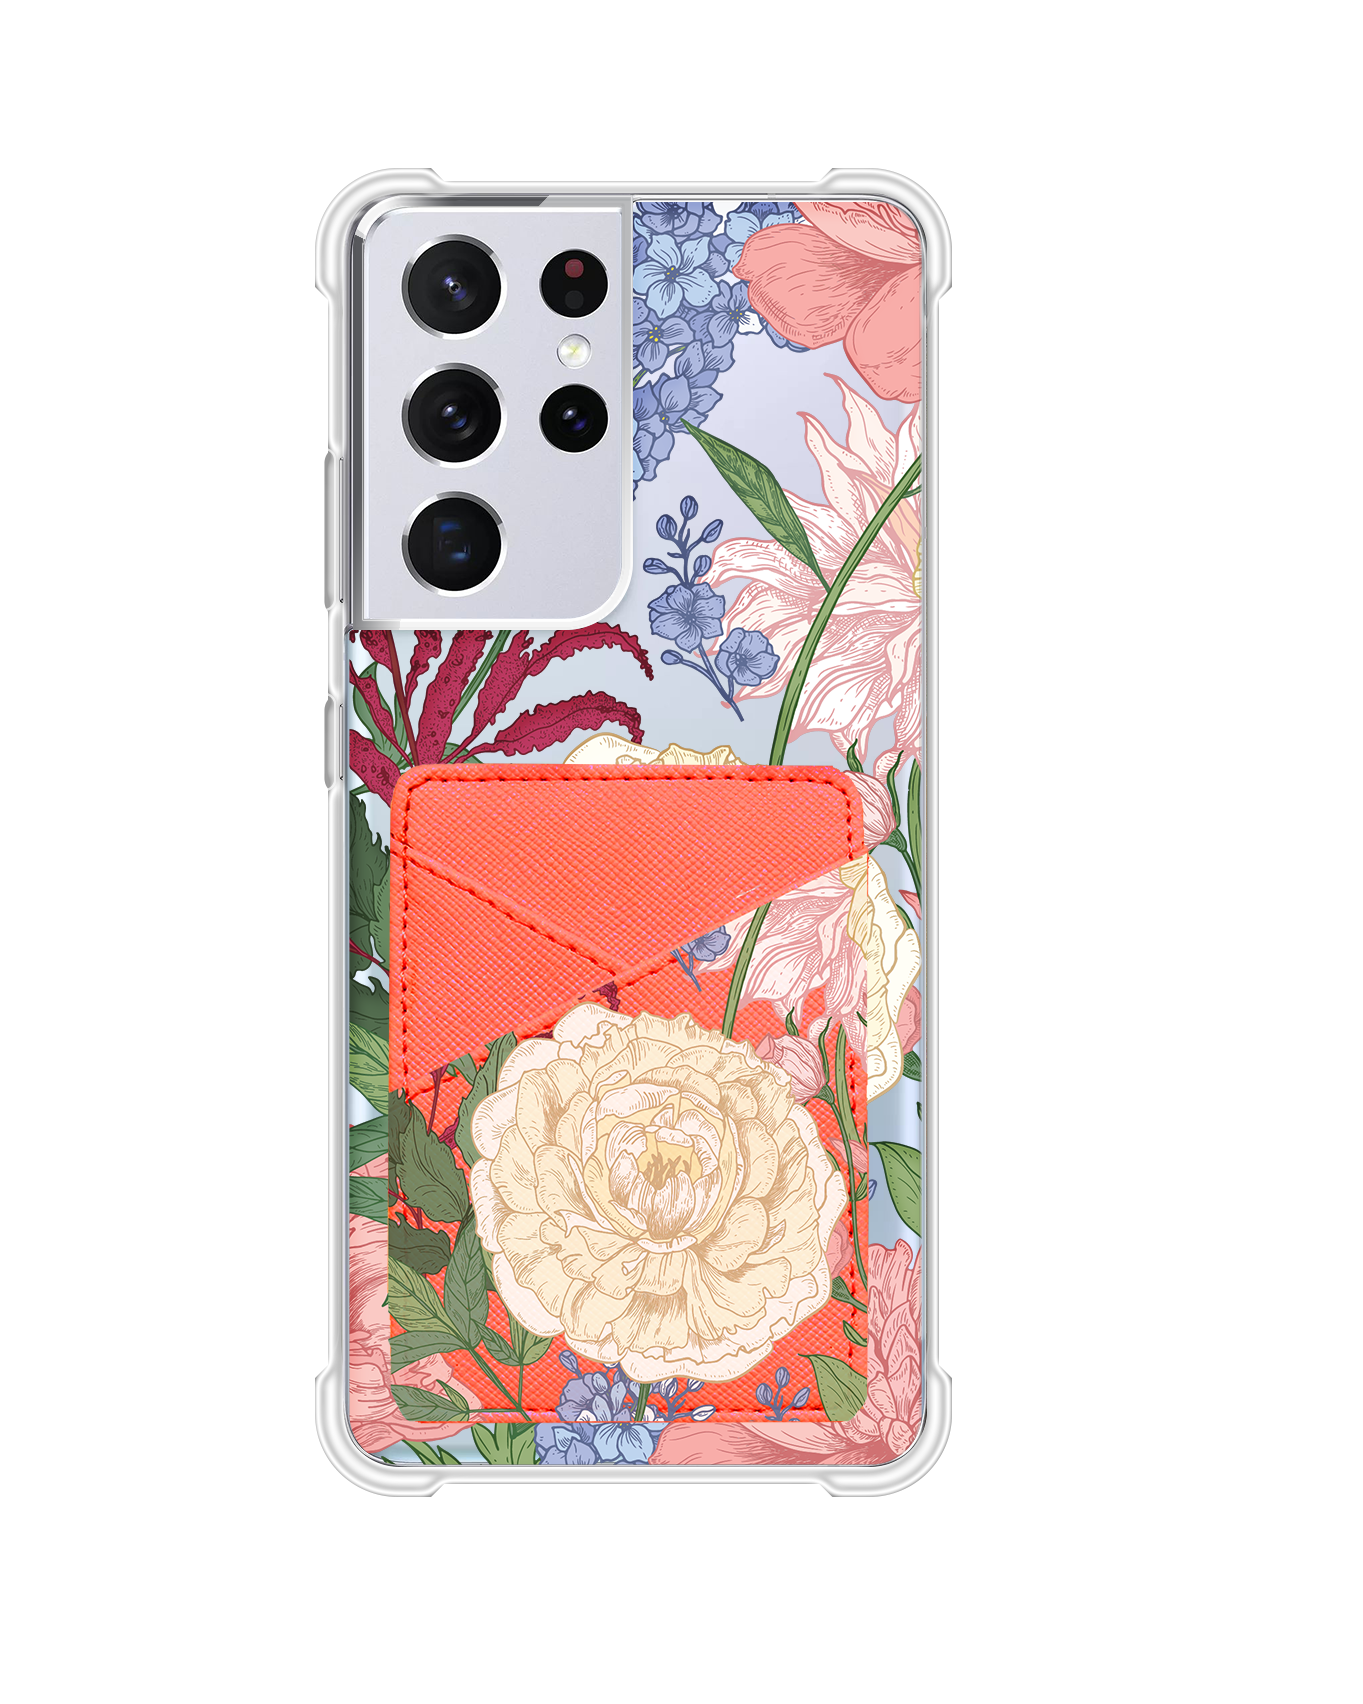 Android Phone Wallet Case - July Delphinium 2.0